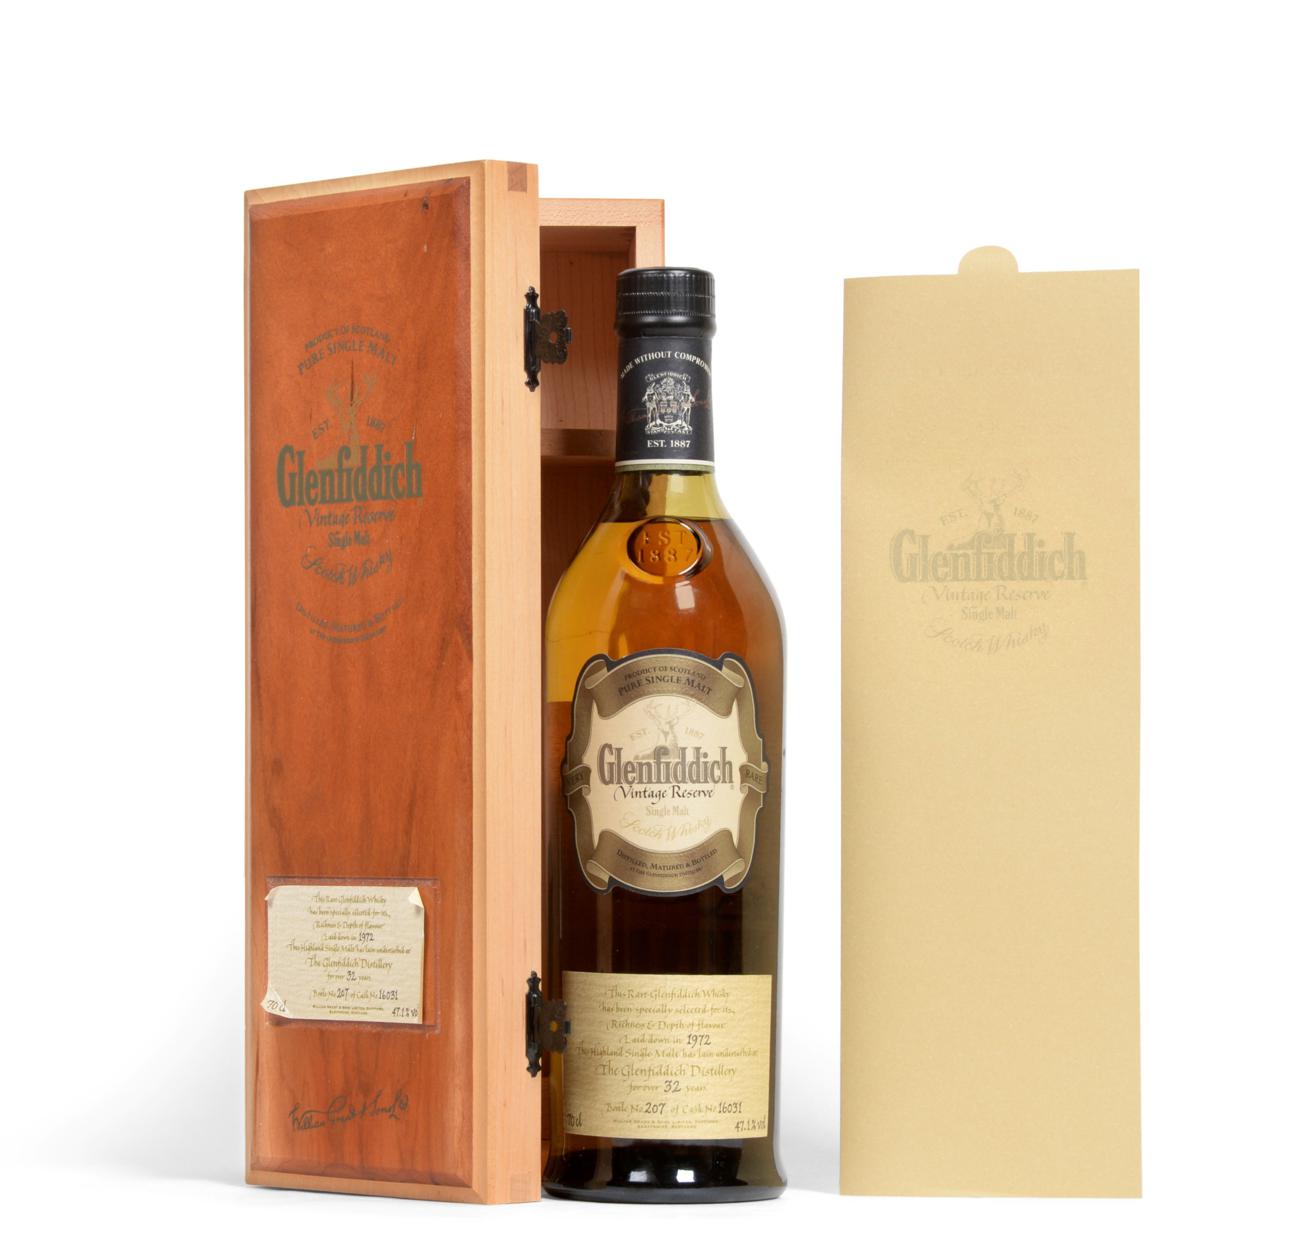 Lot 2164 - Glenfiddich 32 Year Old, laid down in 1972, bottle number 207 of cask no. 16031, 47.1%, 70cl